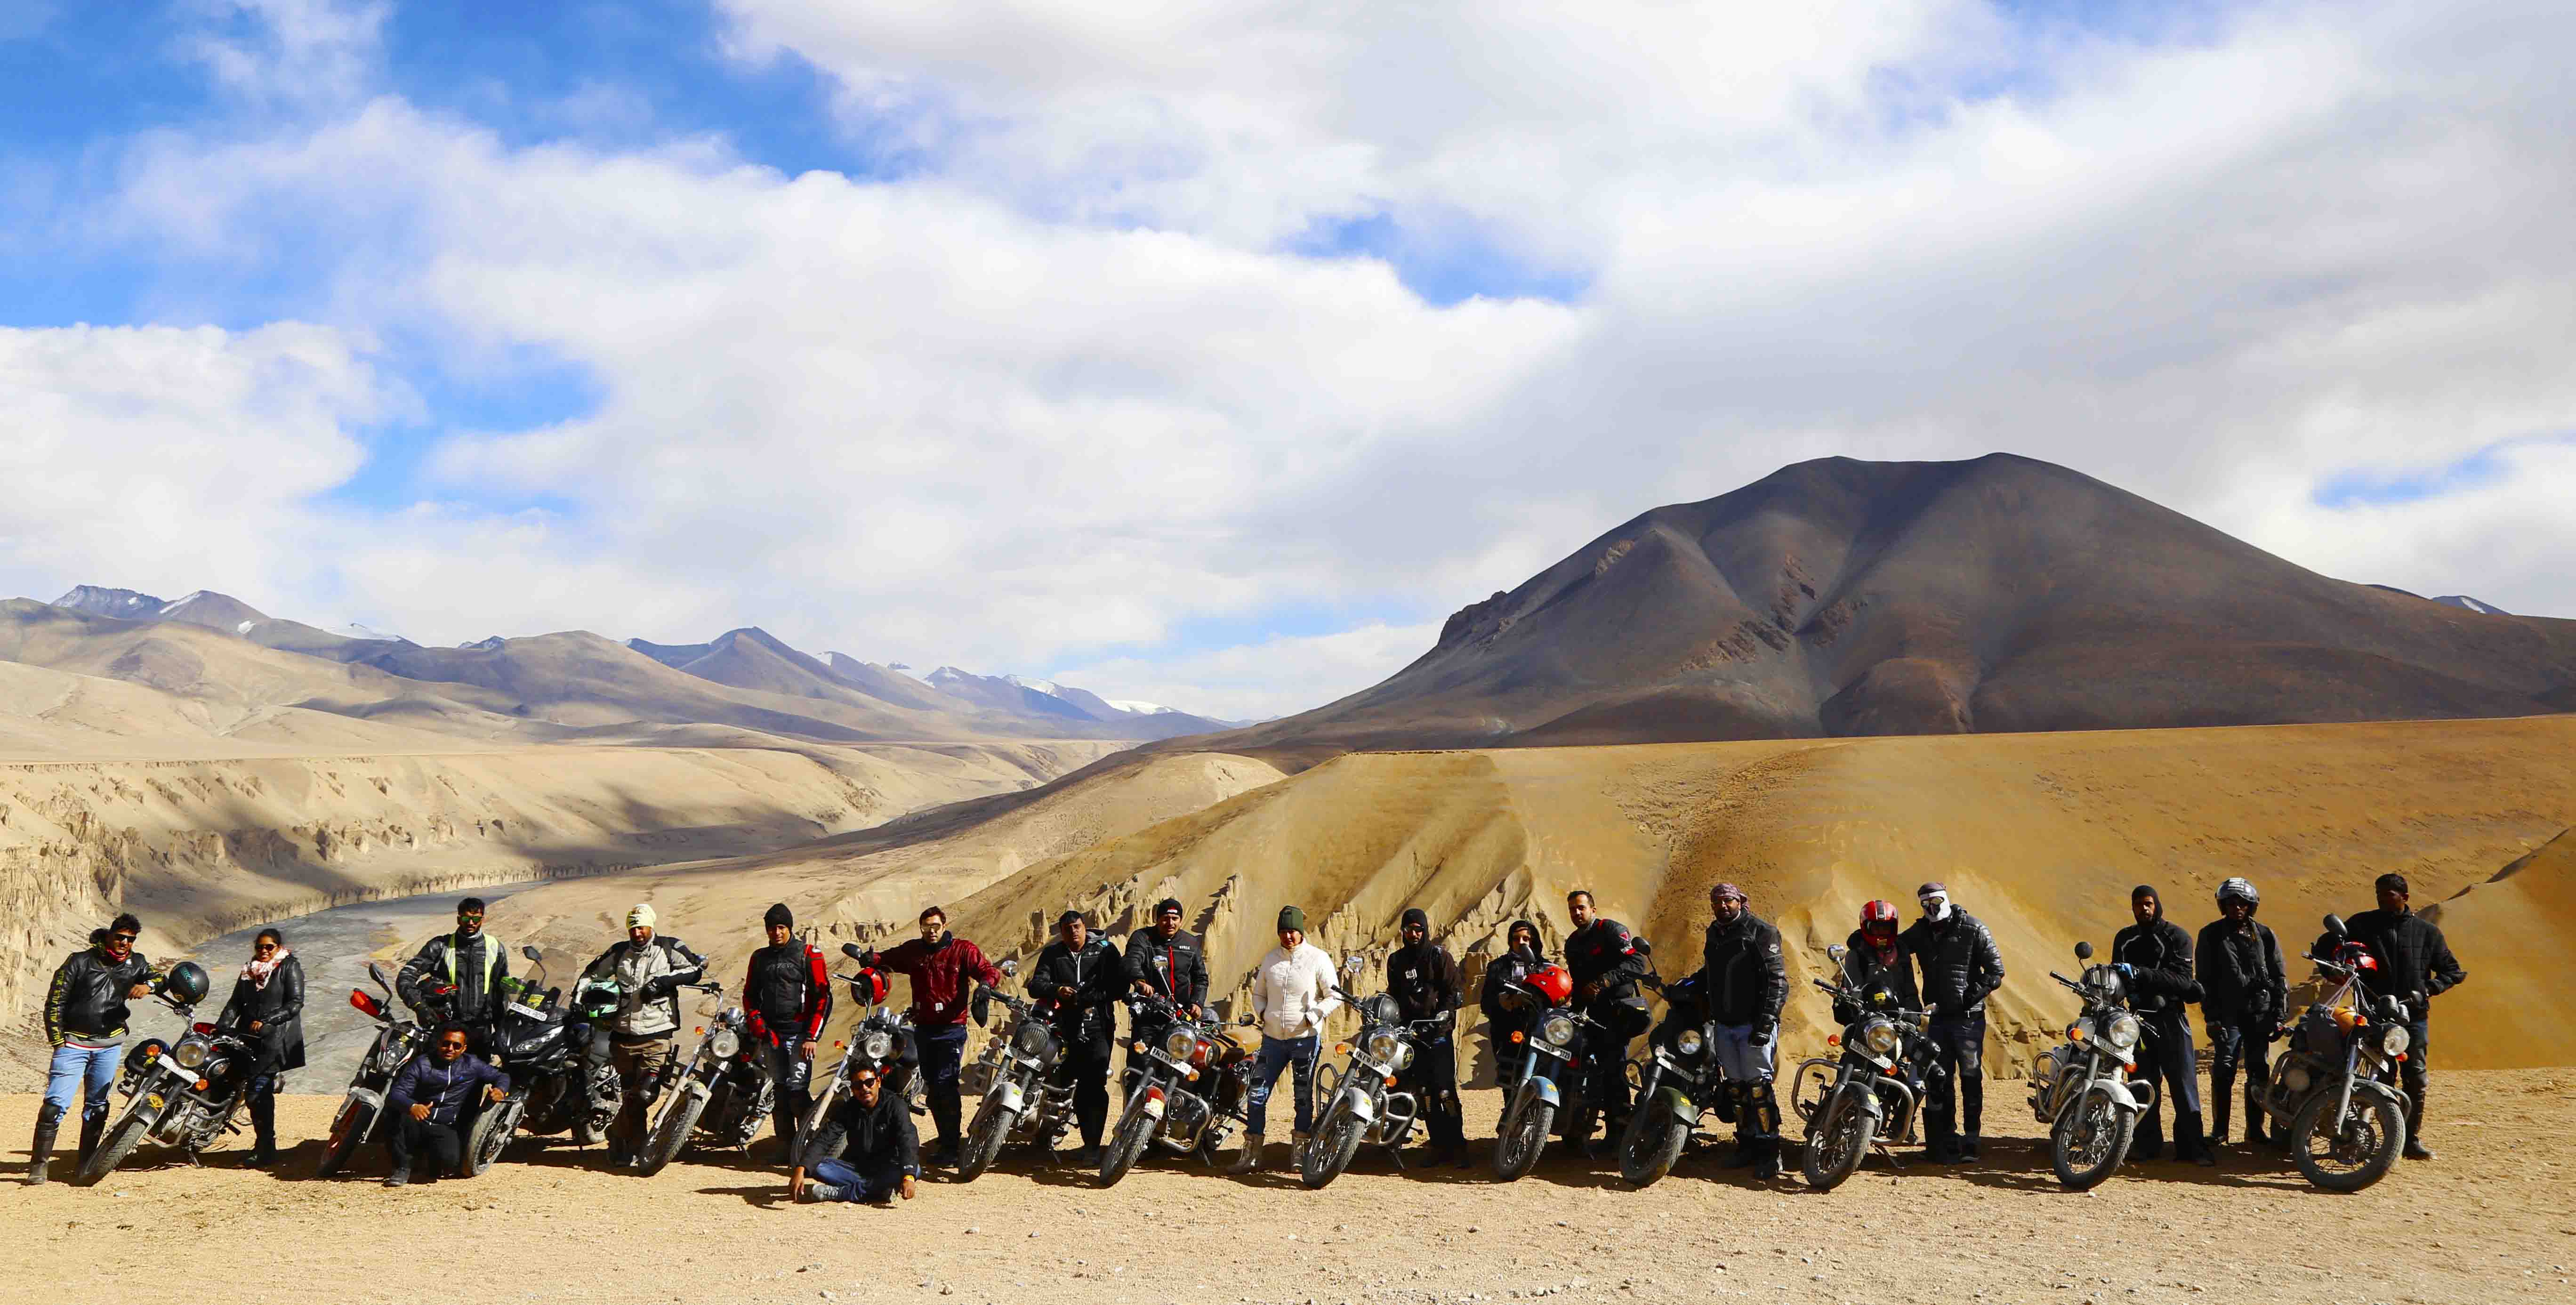 Leh Ladakh is known as the Land of High Passes